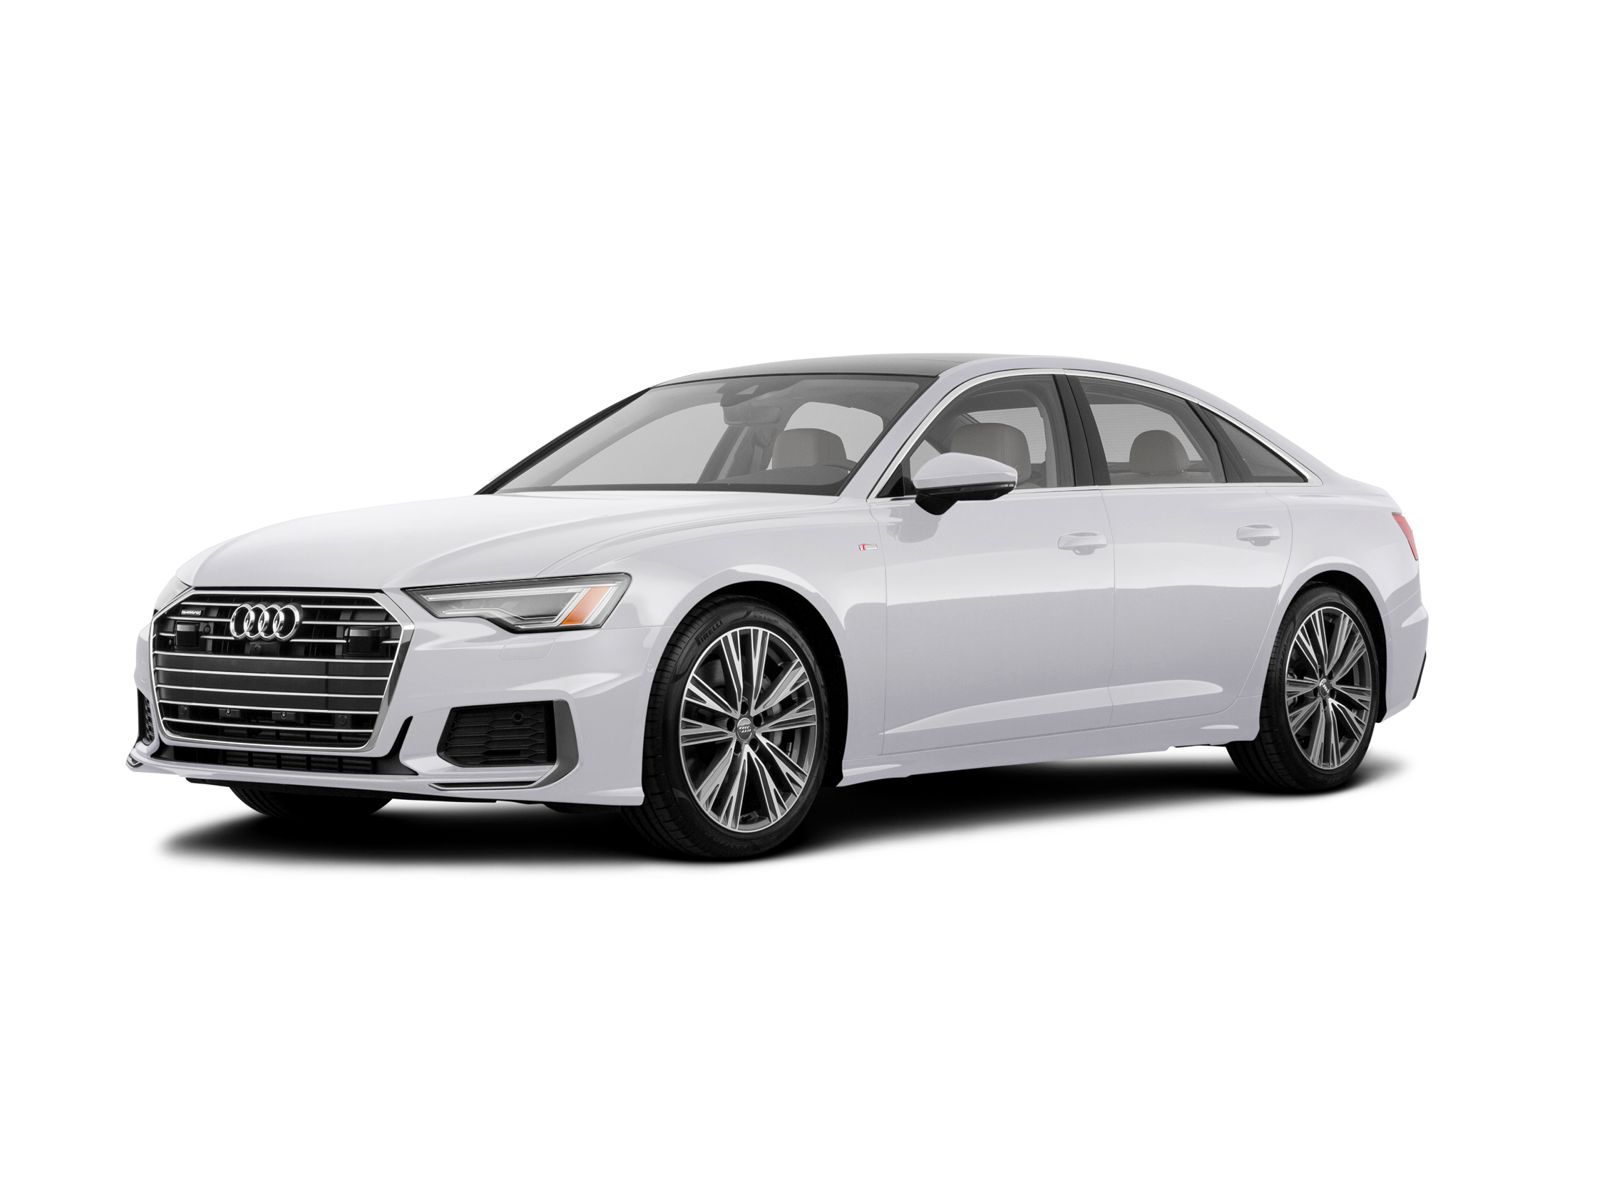 2020 Audi A6 Research, photos, specs, and expertise | CarMax